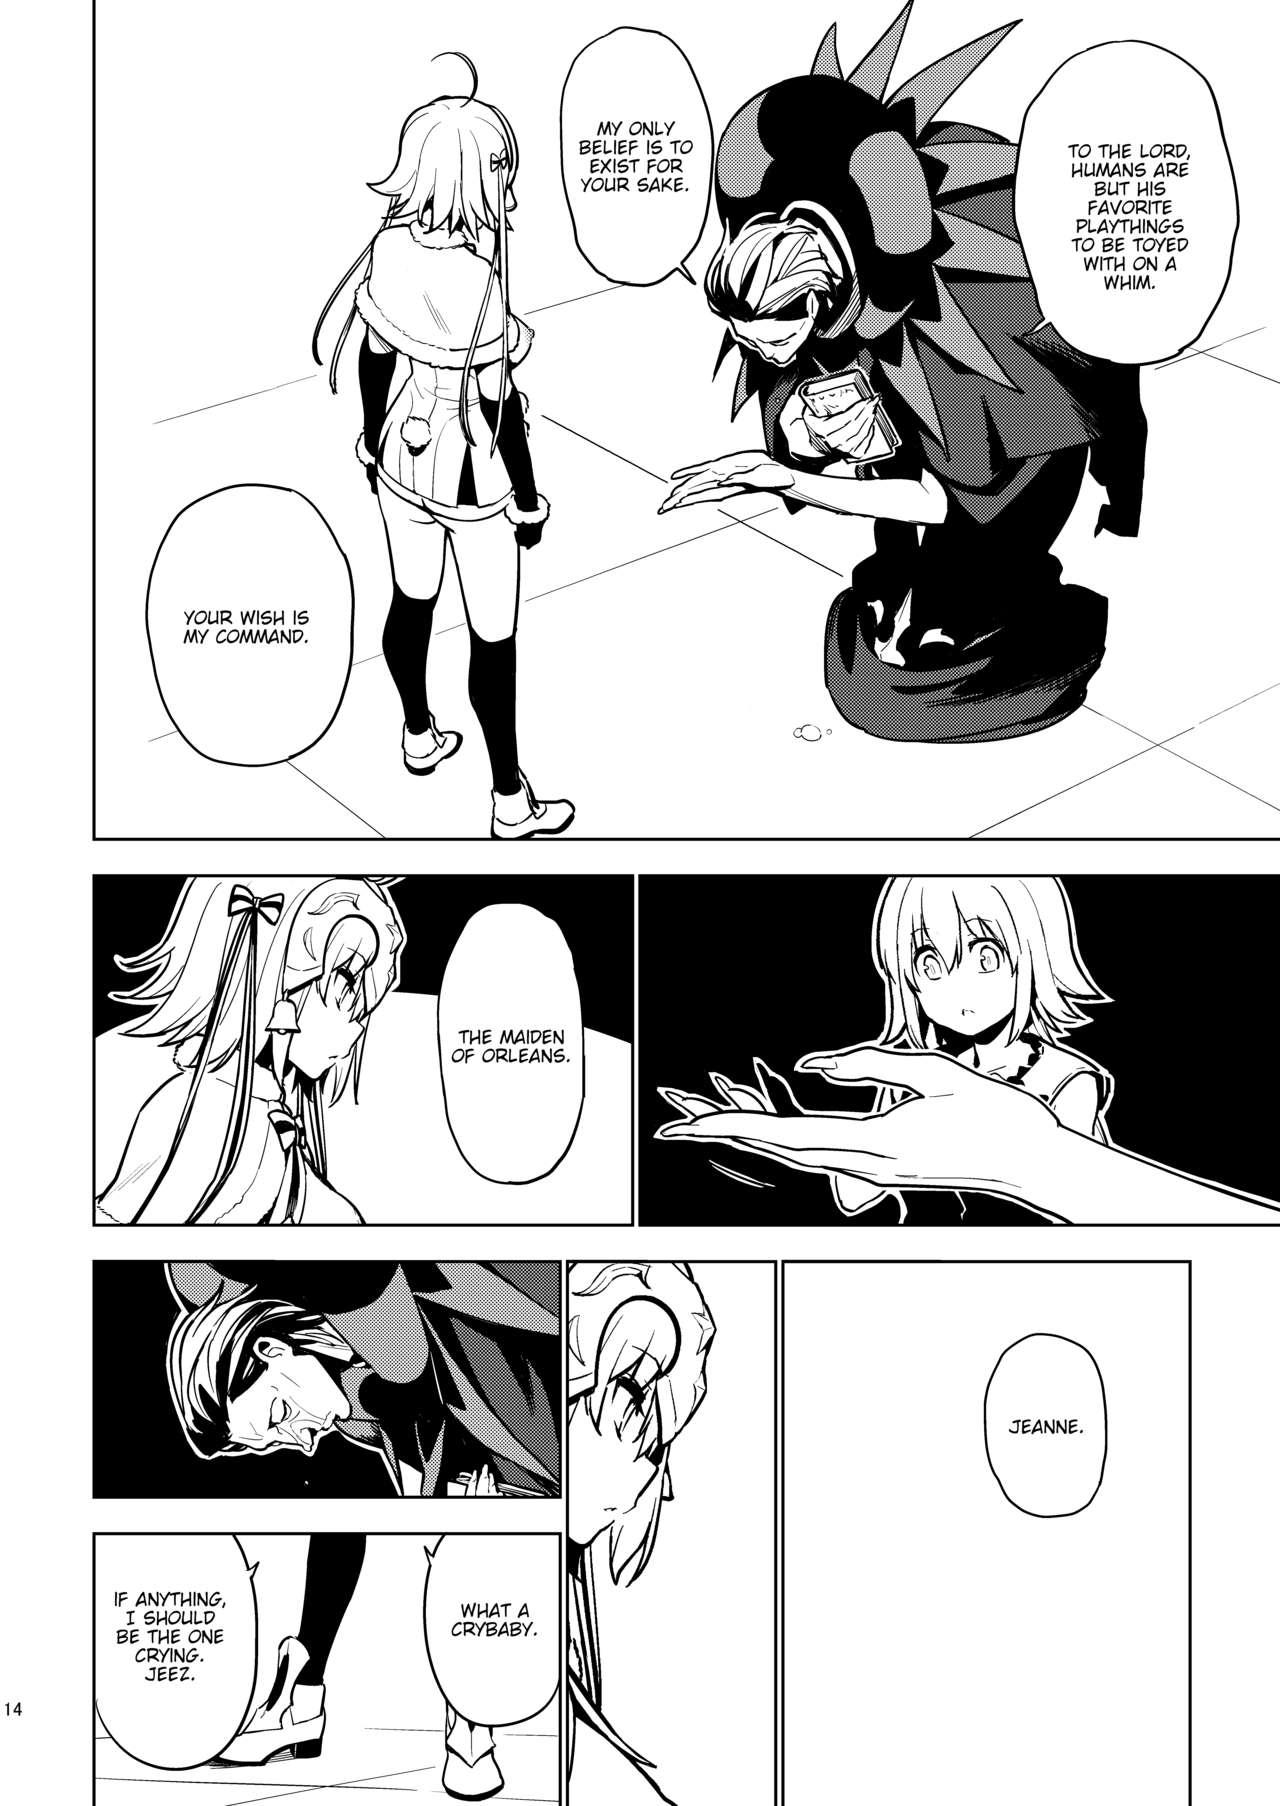 Blowjob SO BORED - Fate grand order Hot Women Fucking - Page 12